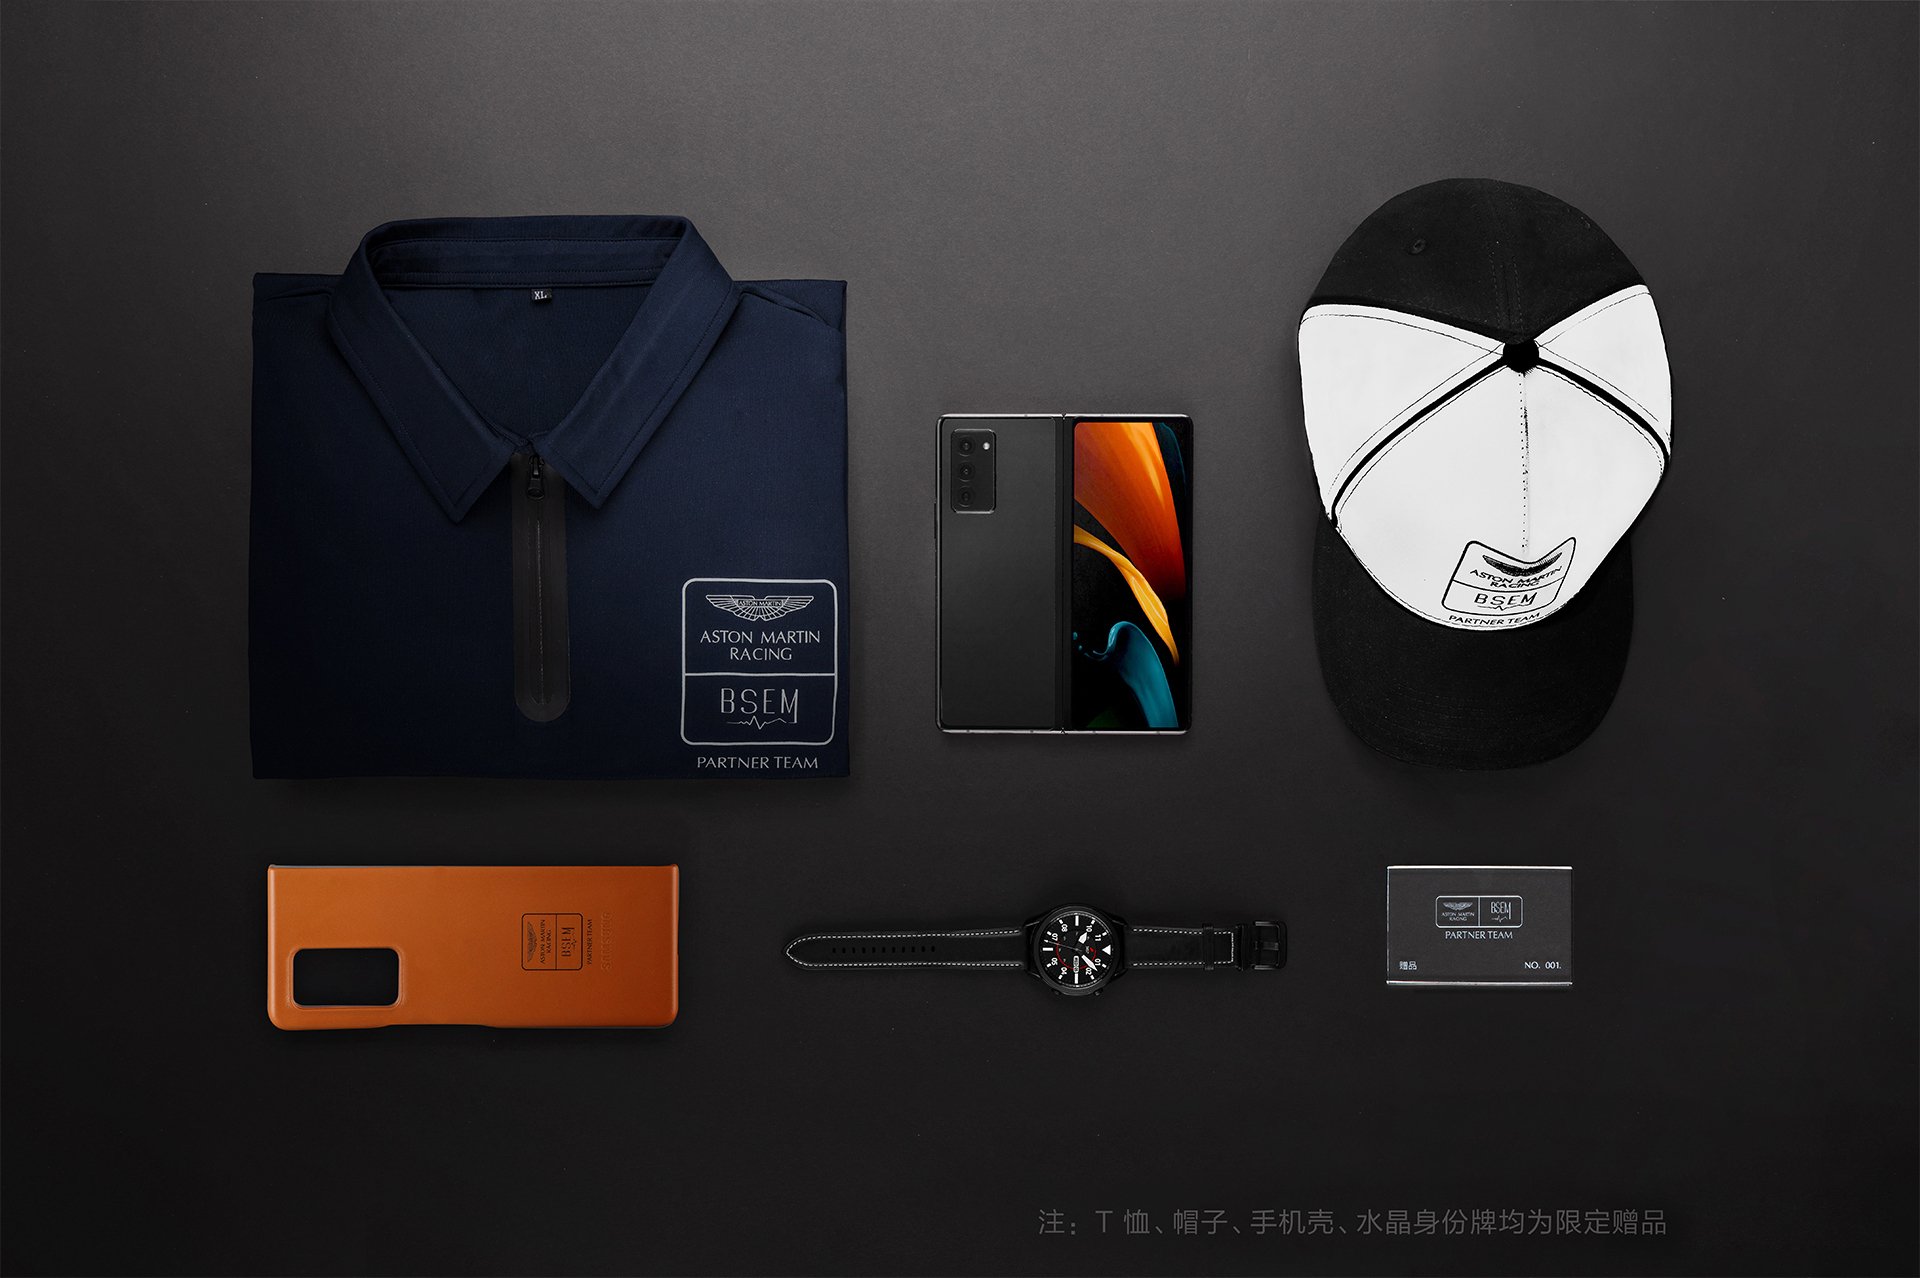 Samsung Galaxy Z Fold 2 Aston Martin Limited Edition is limited to China